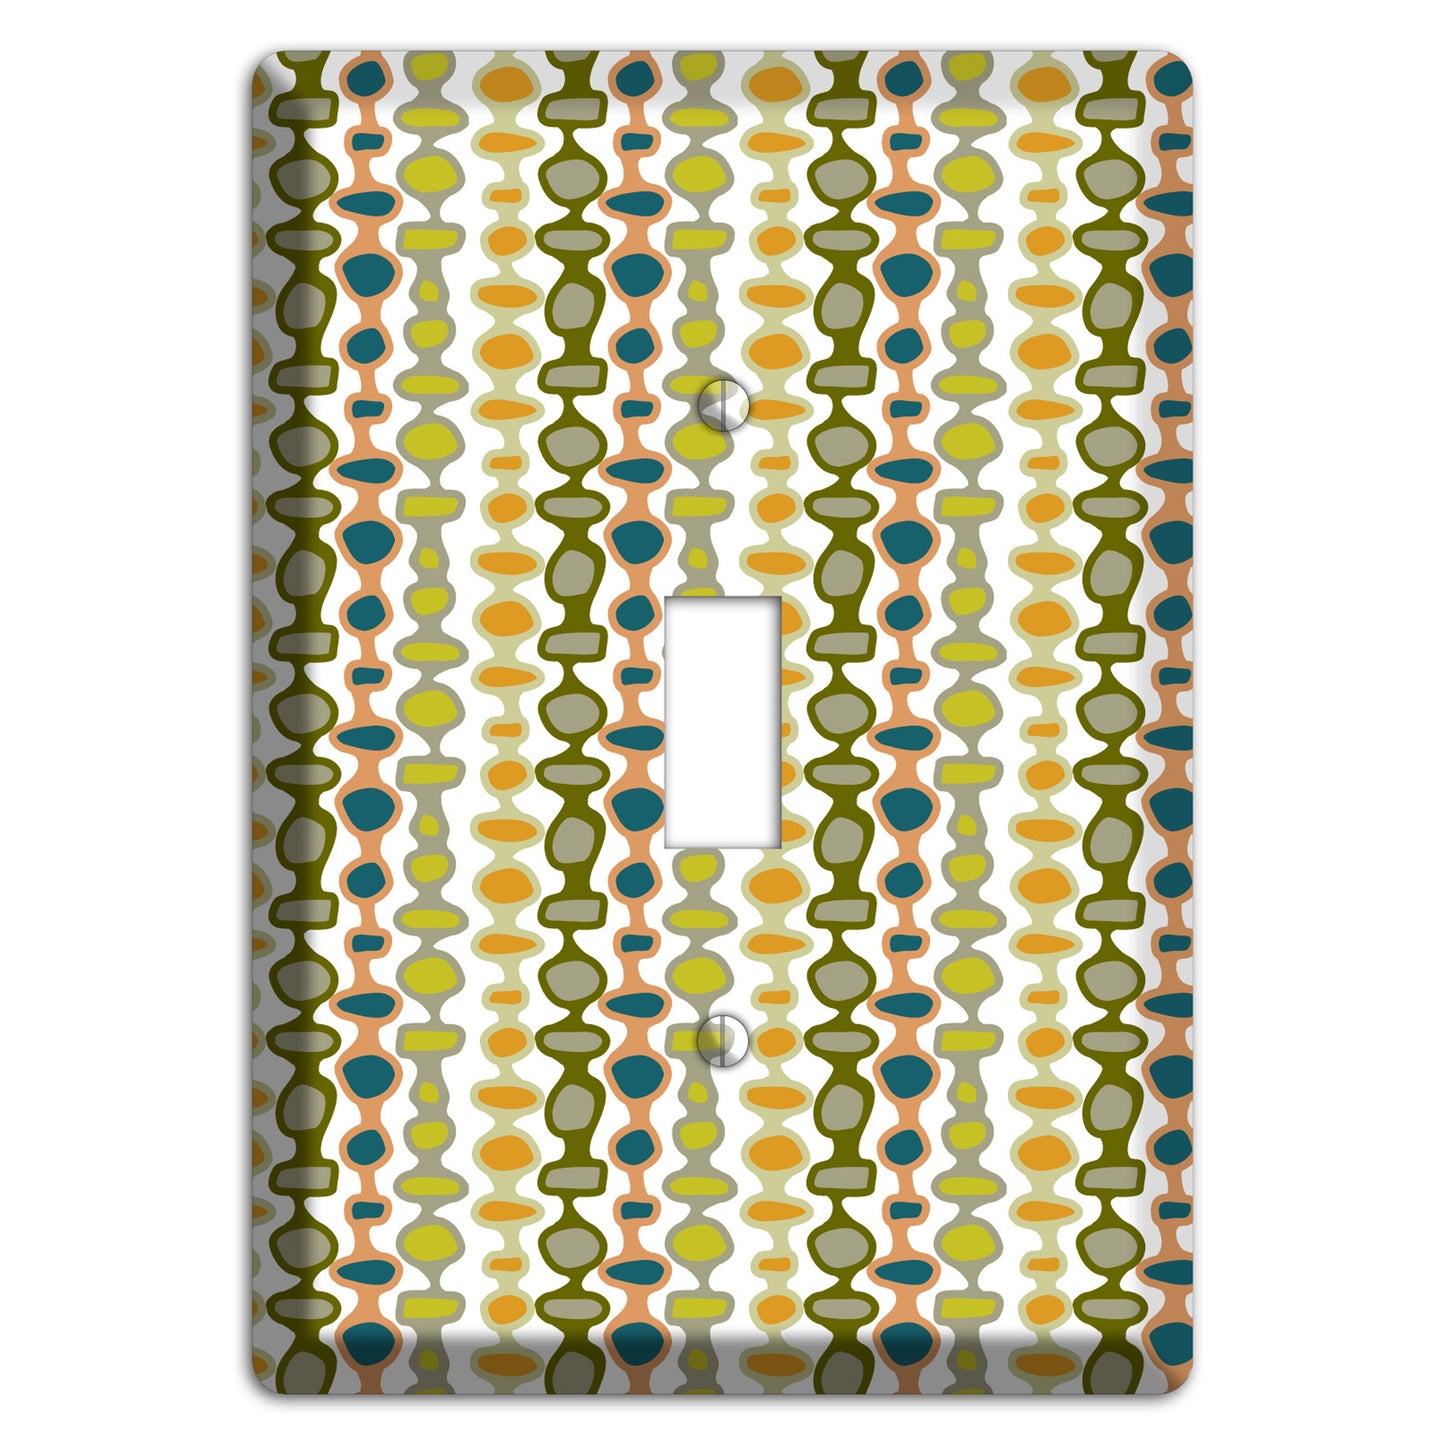 Multi Olive and Mustard Bead and Reel 2 Cover Plates